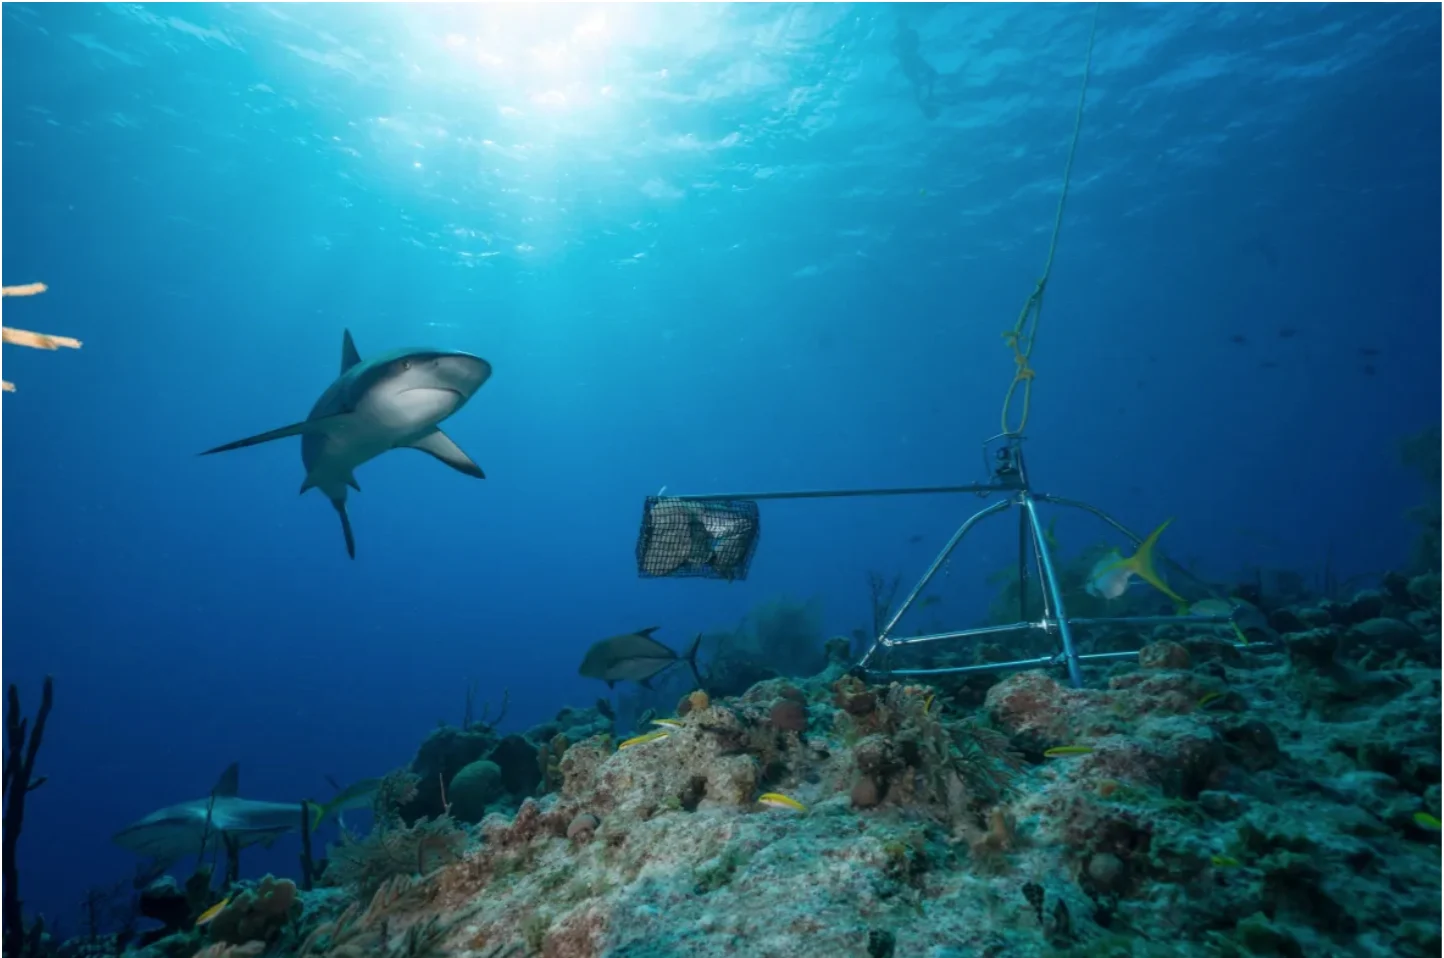 The baited remote underwater video cameras, or BRUVs, each recorded an hour of footage. (Andy Mann/Global FinPrint)